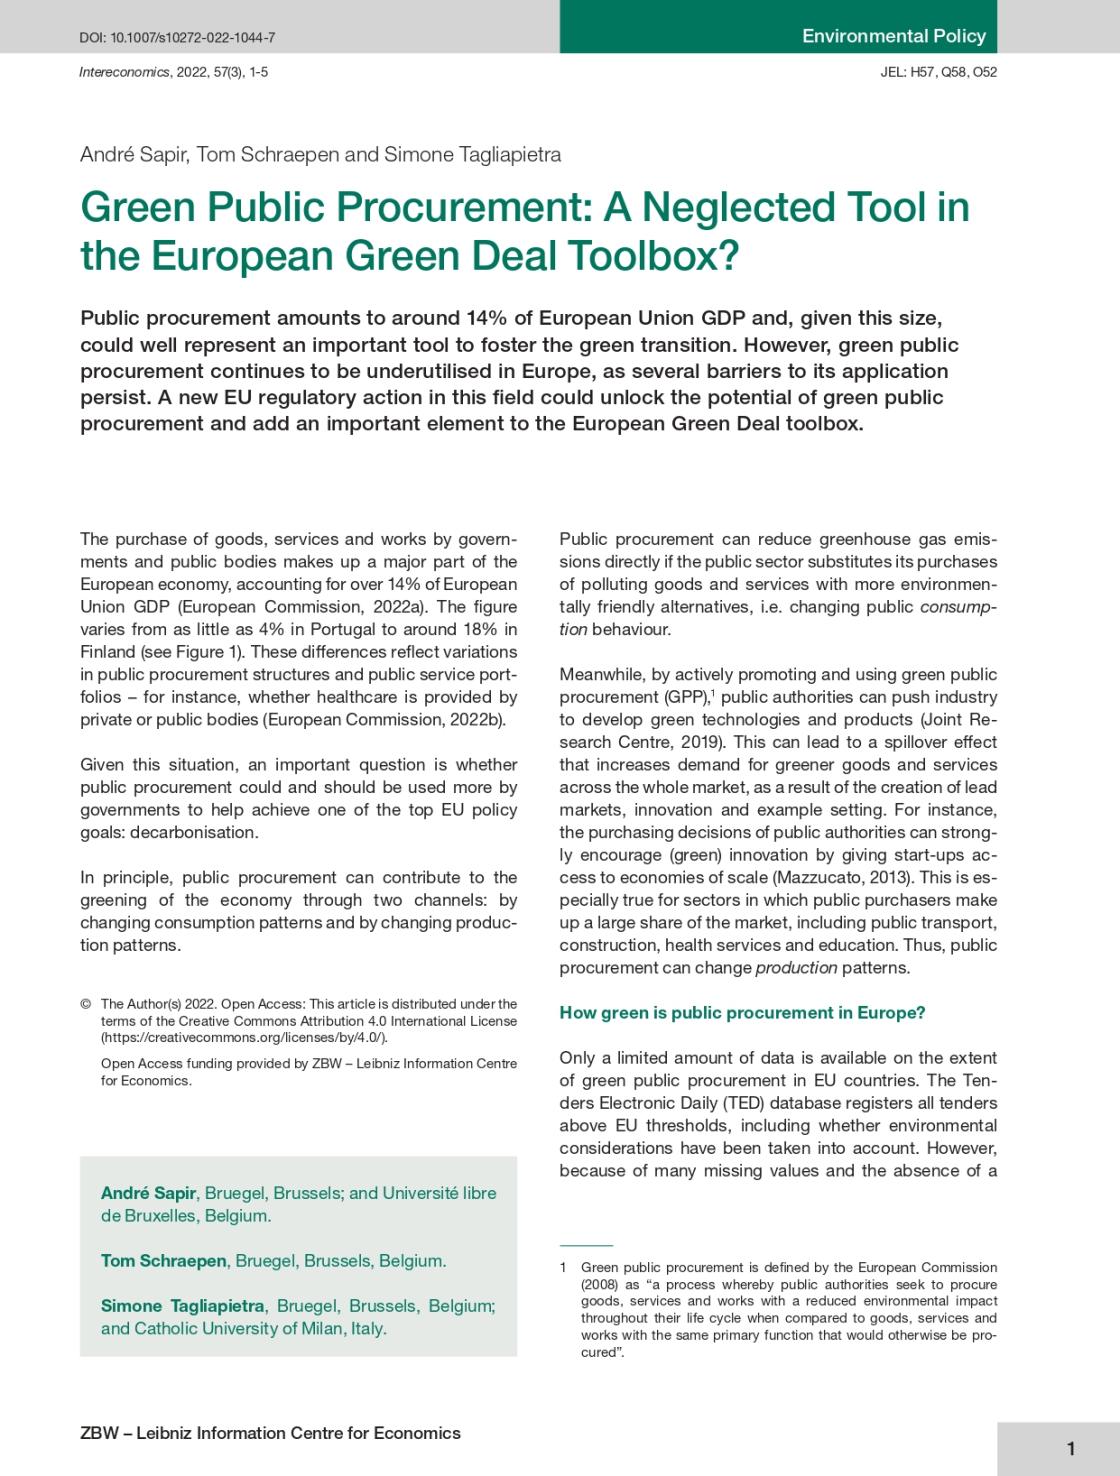 green-public-procurement-a-neglected-tool-in-the-european-green-deal-toolbox-1_page-0001